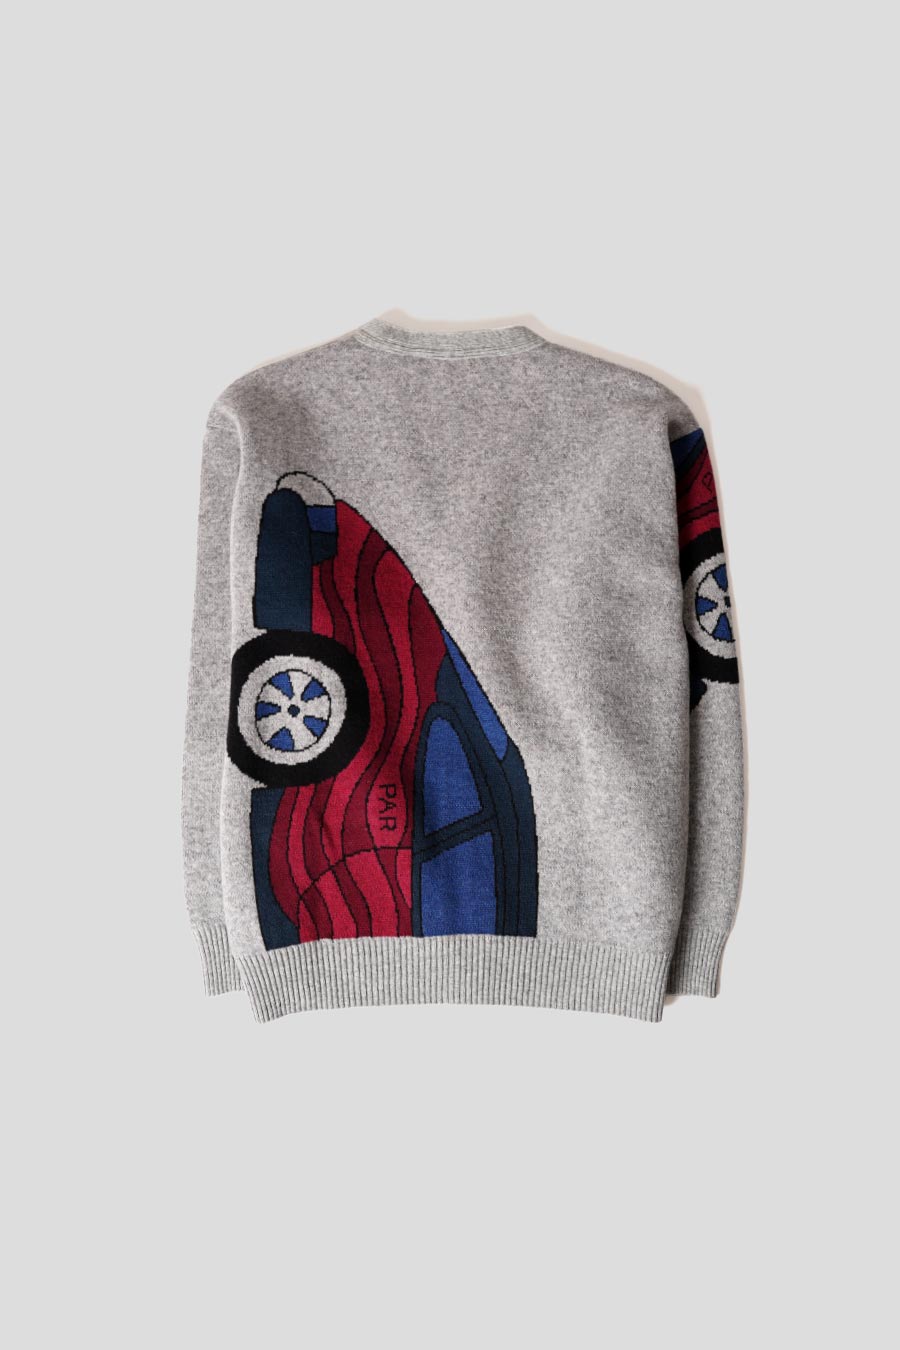 BY PARRA - GREY NO PARKING KNITTED CARDIGAN